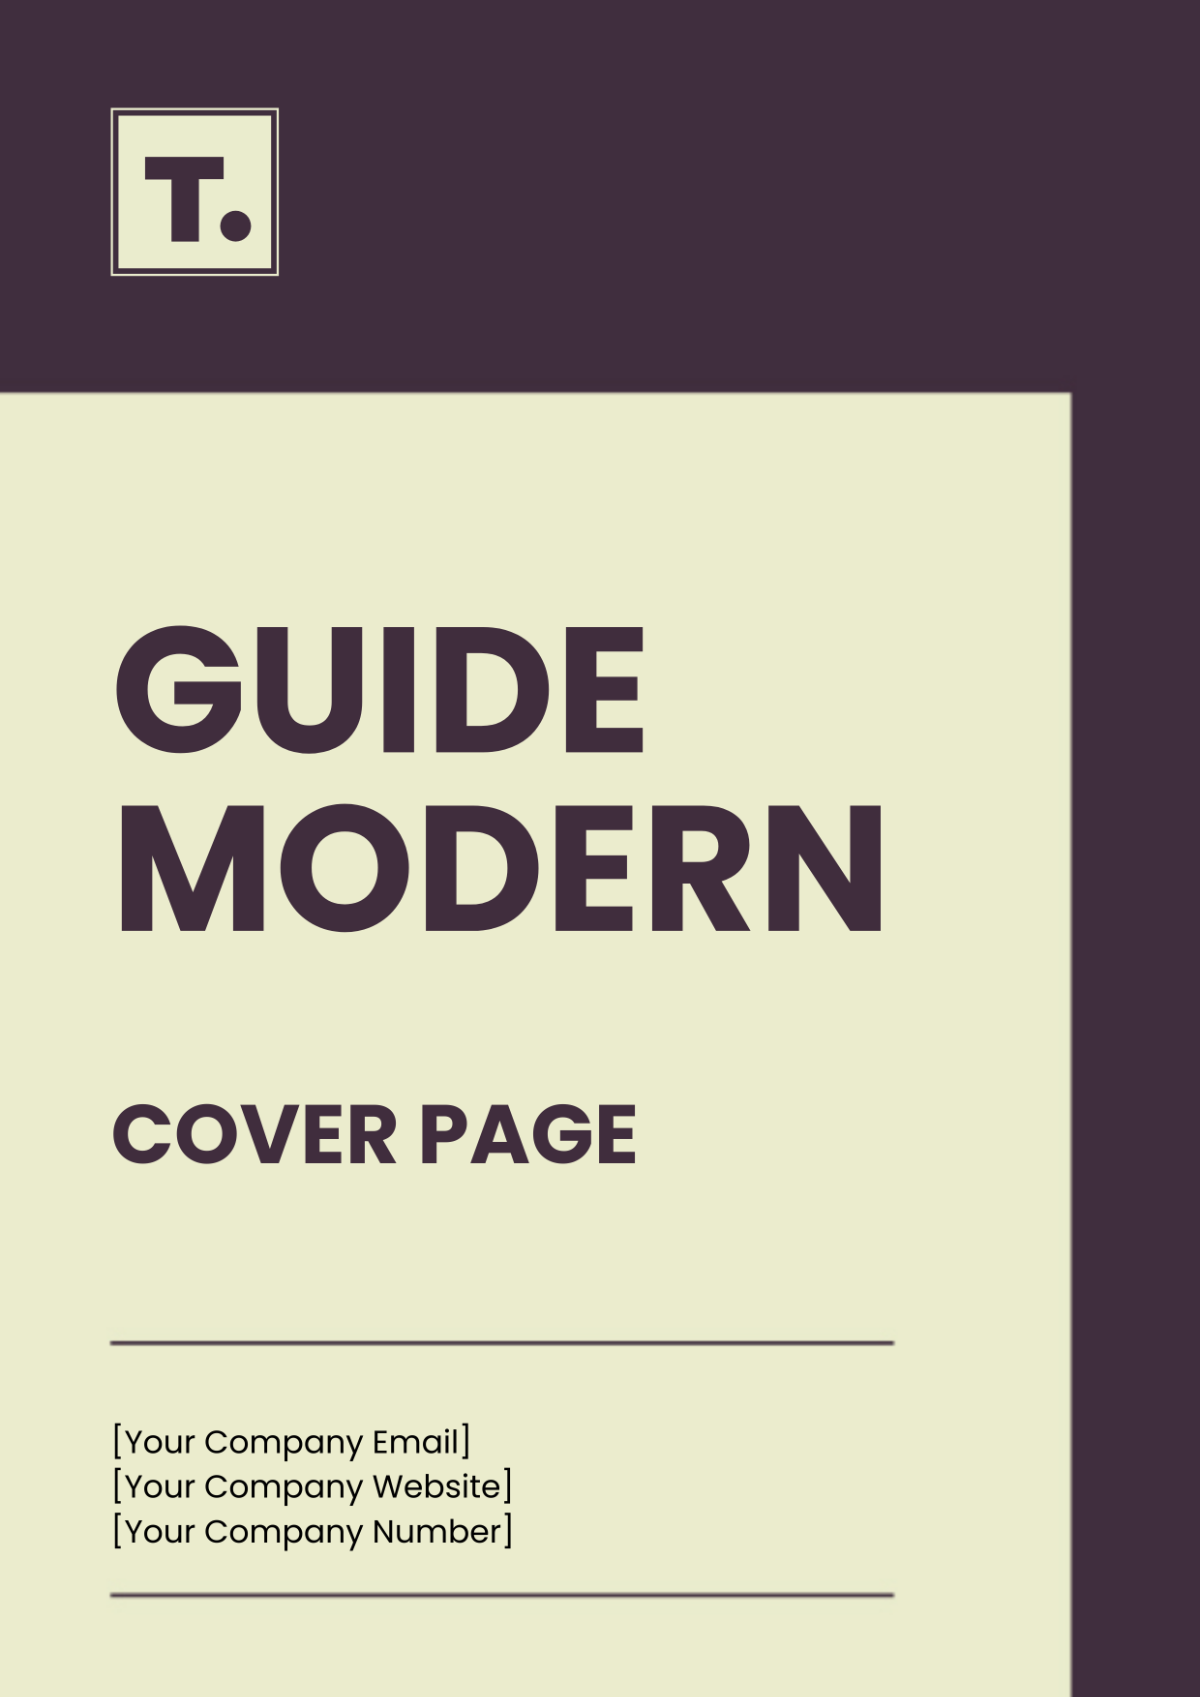 Guide Modern Cover Page